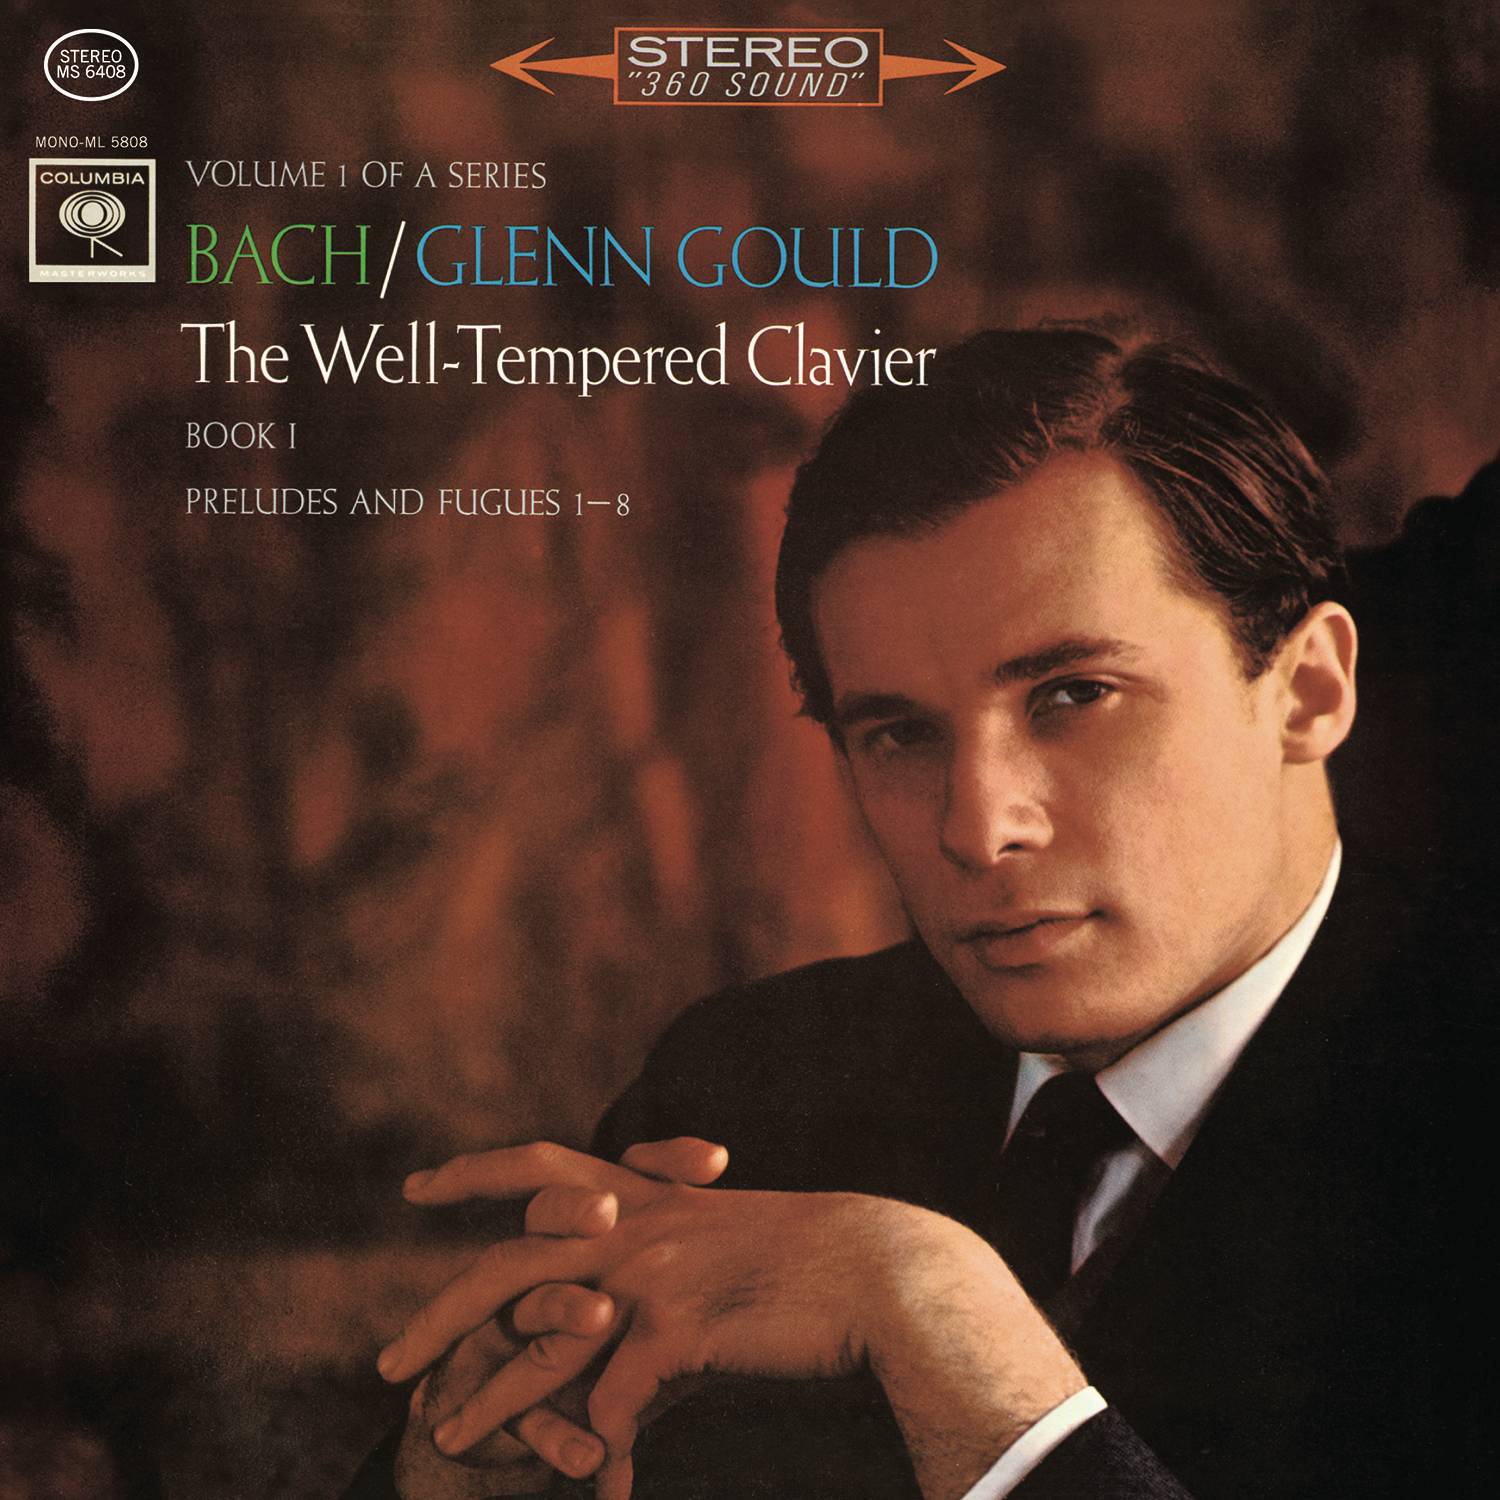 Bach: The Well-Tempered Clavier, Book I, Preludes & Fugues Nos. 1-8, BWV 846-853 ((Gould Remastered))